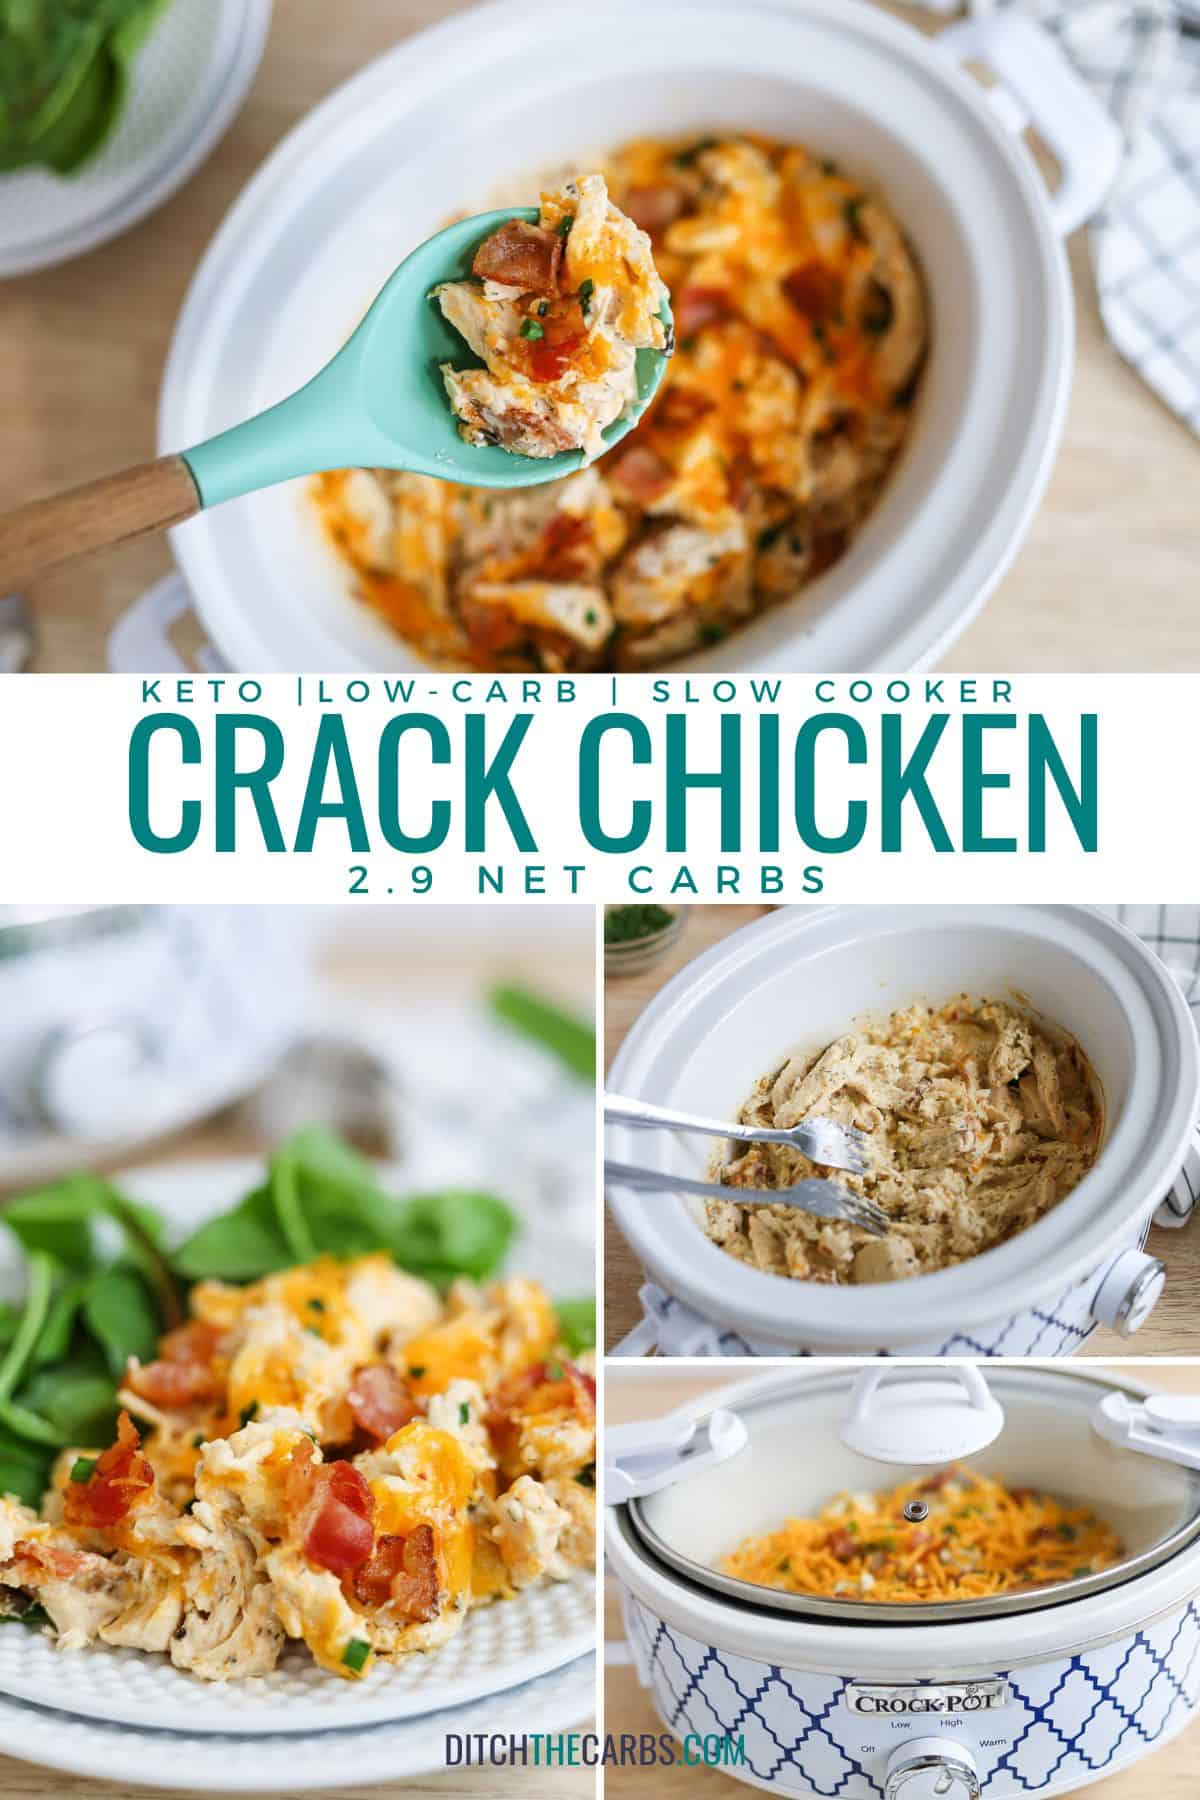 A collage of images showing keto crack chicken being made at various stages.